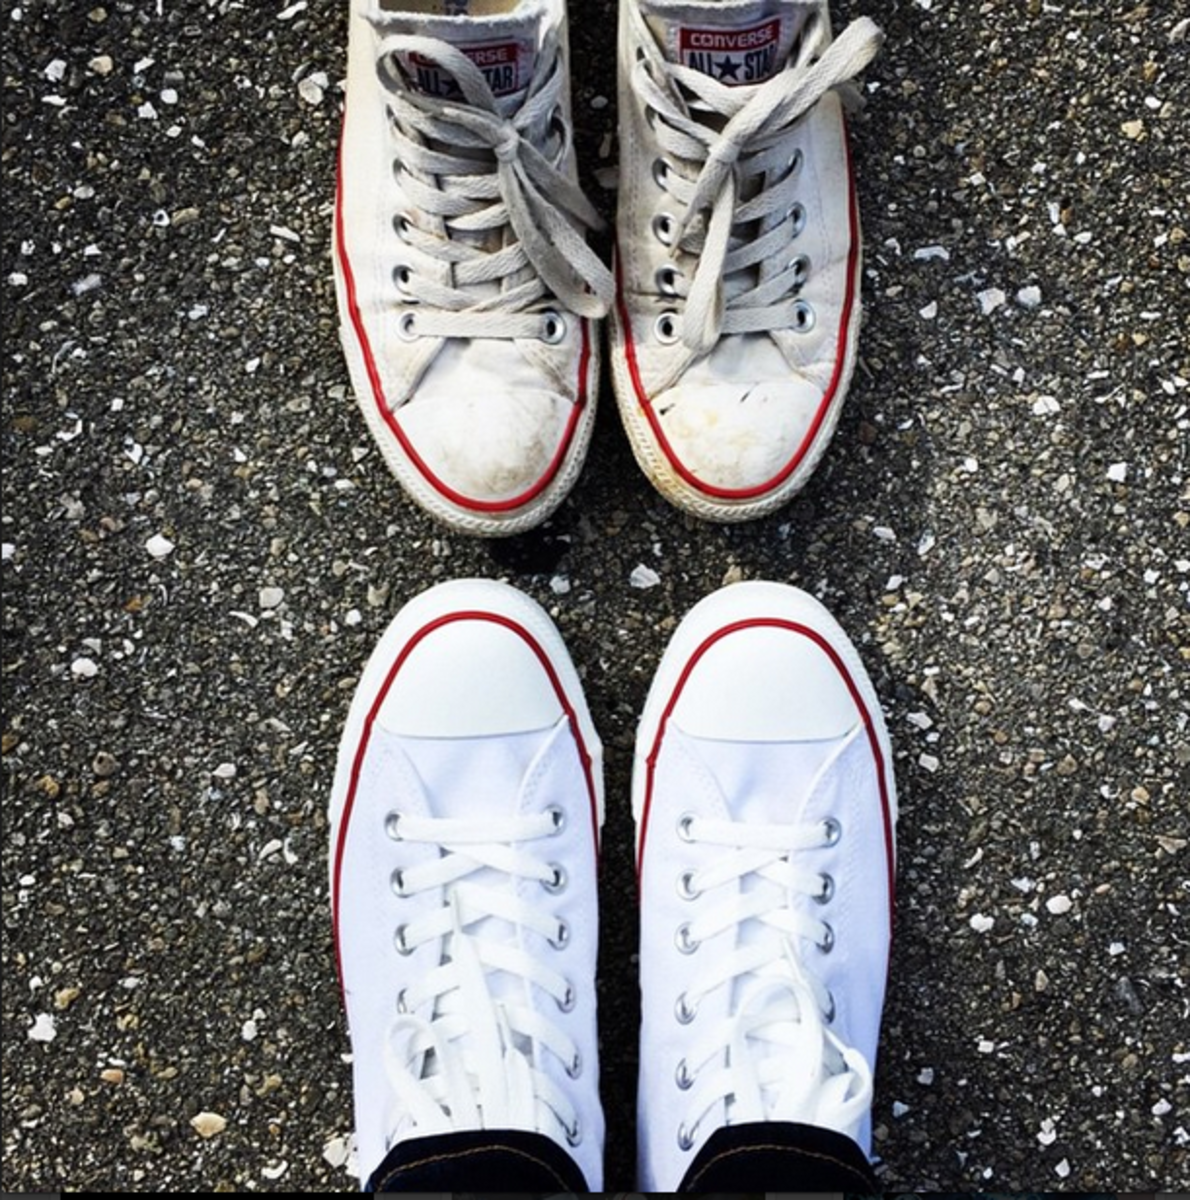 The shoes in question. Photo: Instagram/@converse